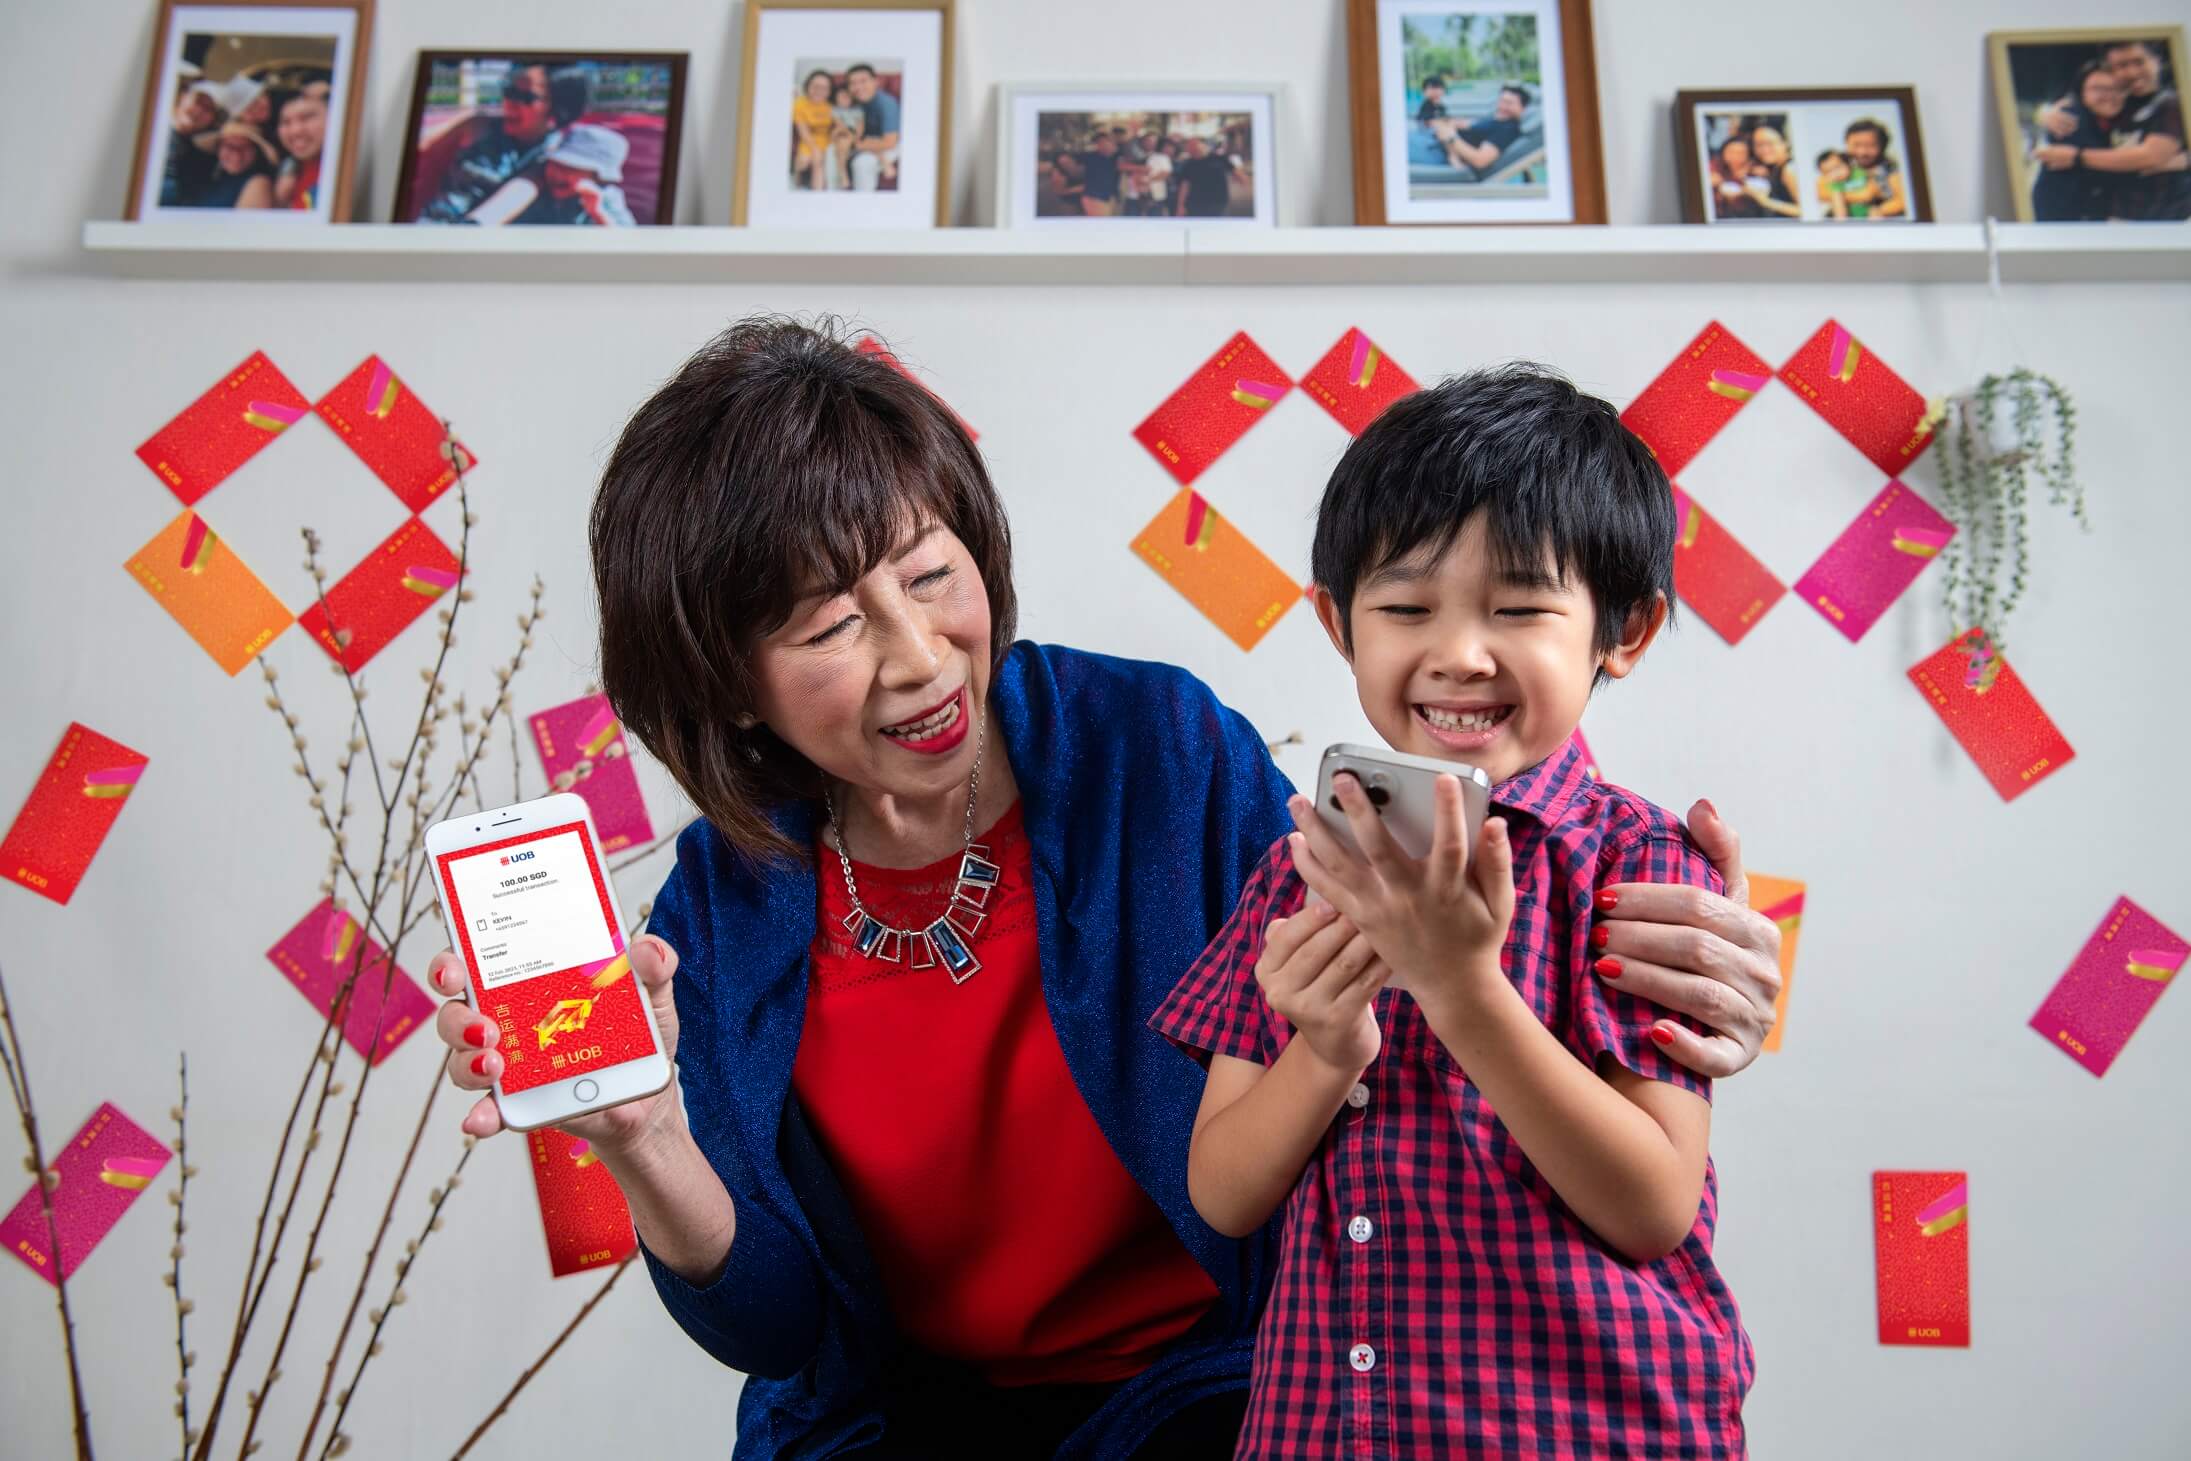 In just five steps, UOB customers can send an auspicious e-hongbao safely to their loved ones through UOB Mighty